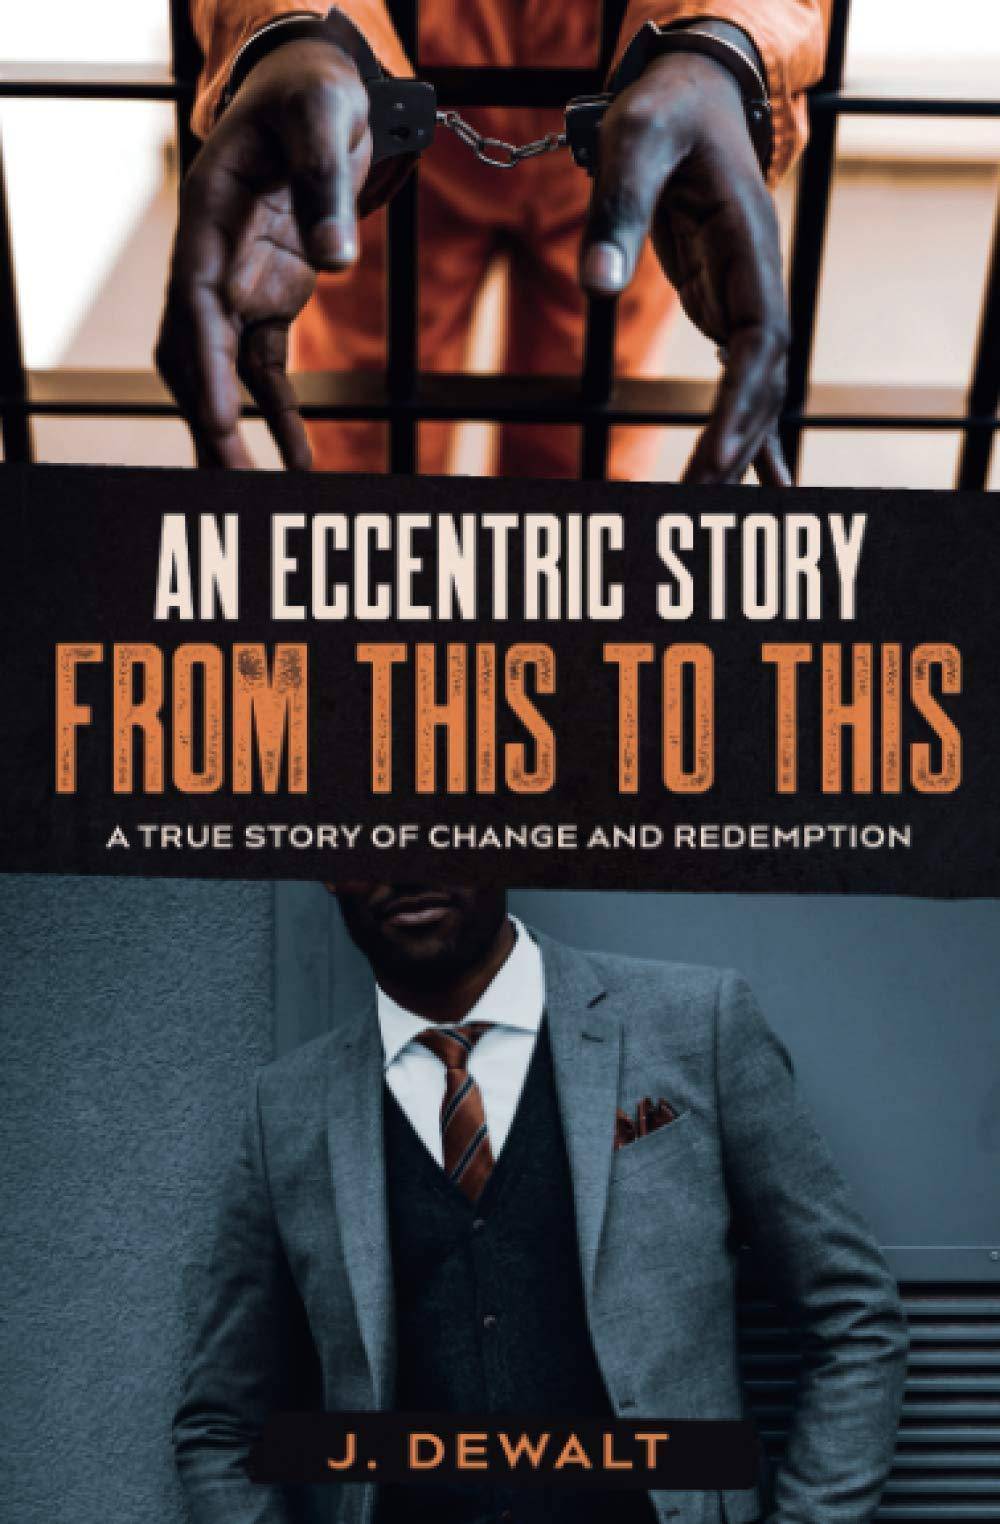 An Eccentric Story, from This to This - SureShot Books Publishing LLC